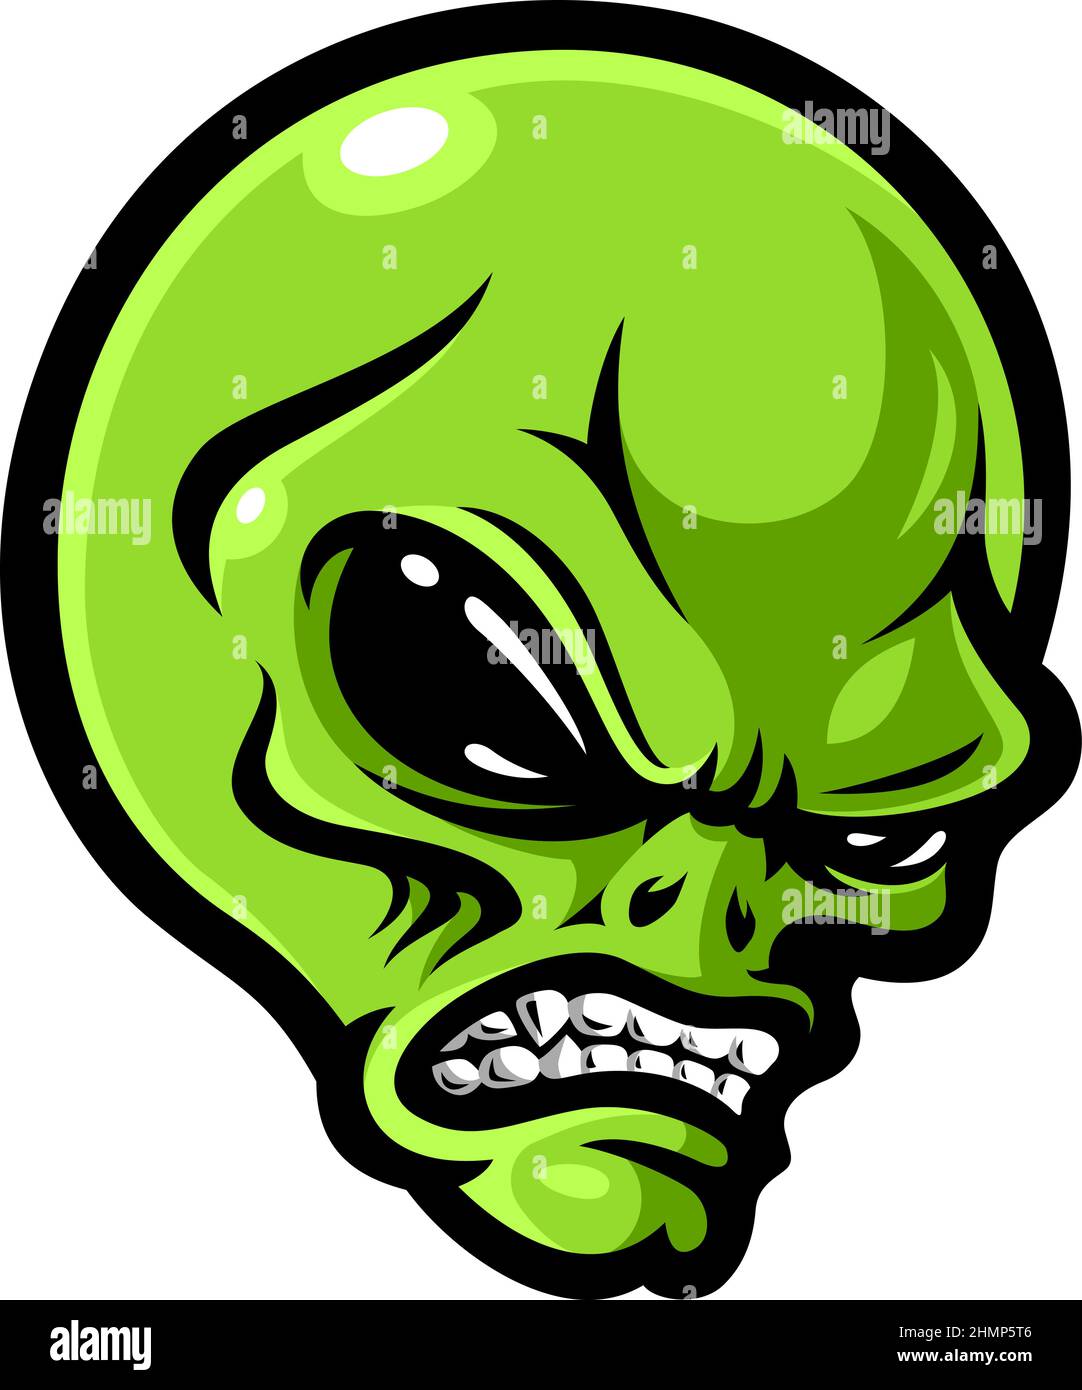 Head of Angry Alien Mascot Character Stock Vector